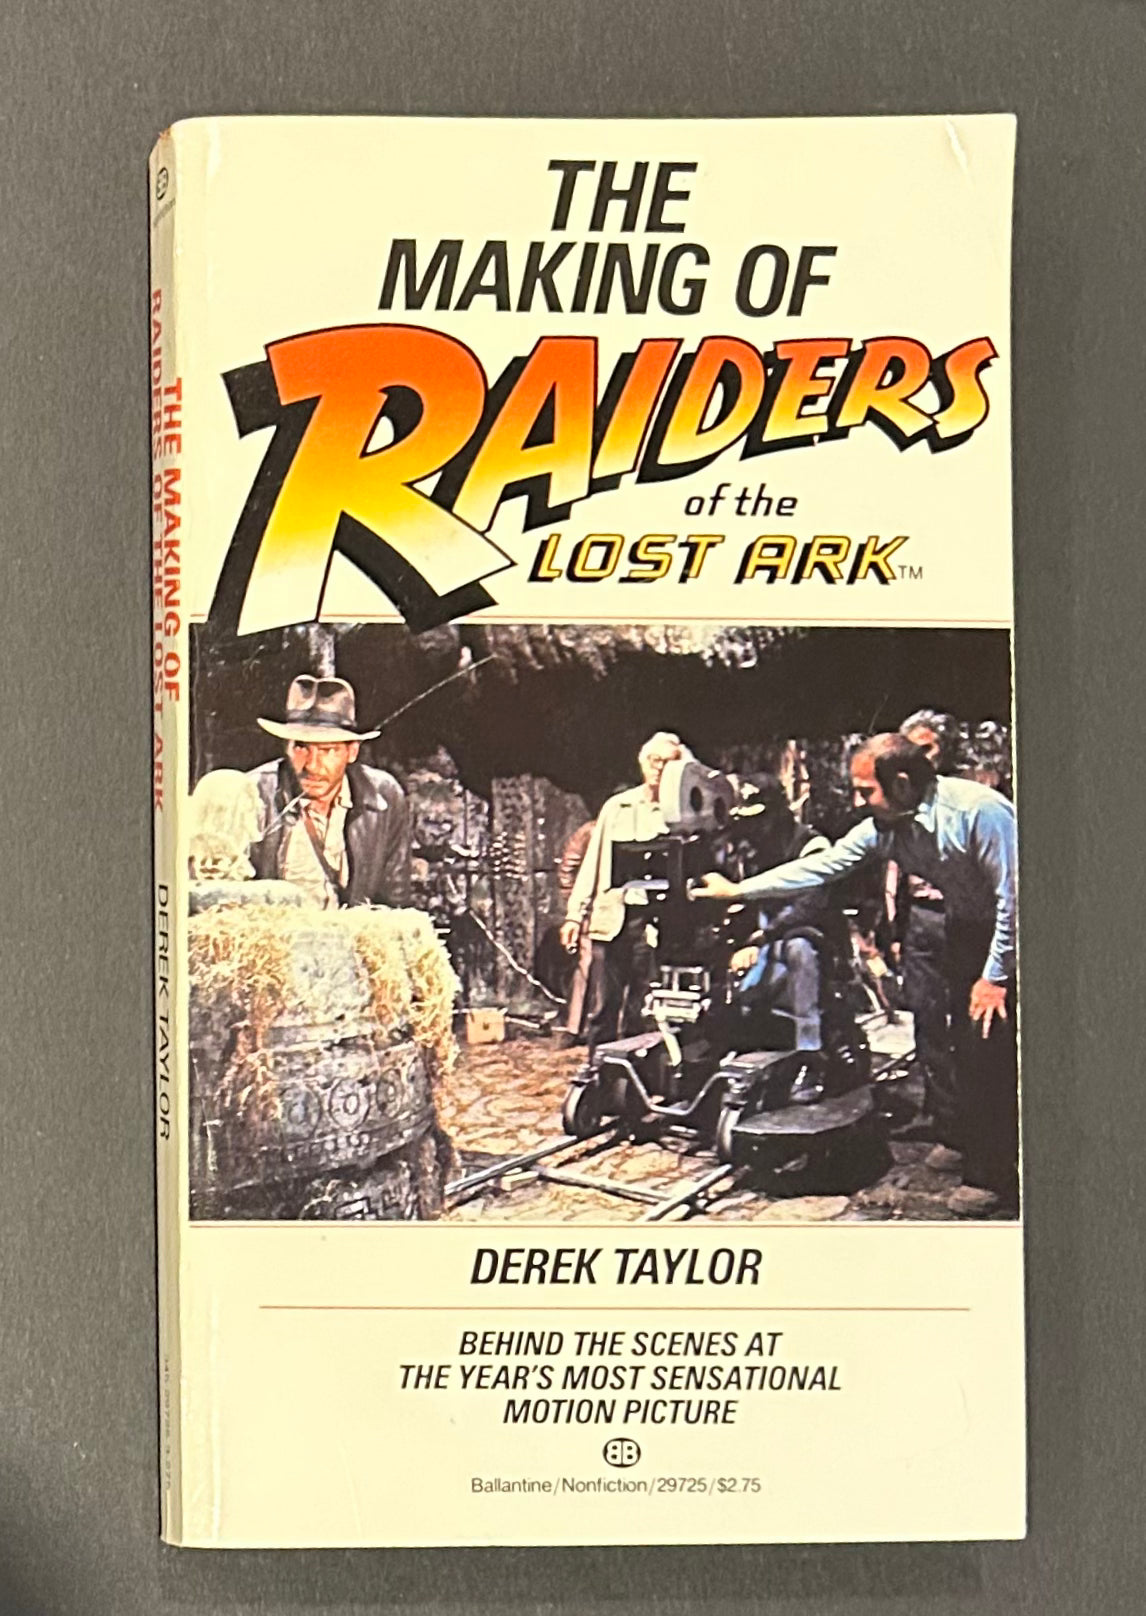 The Making of the Raiders of the Lost Ark